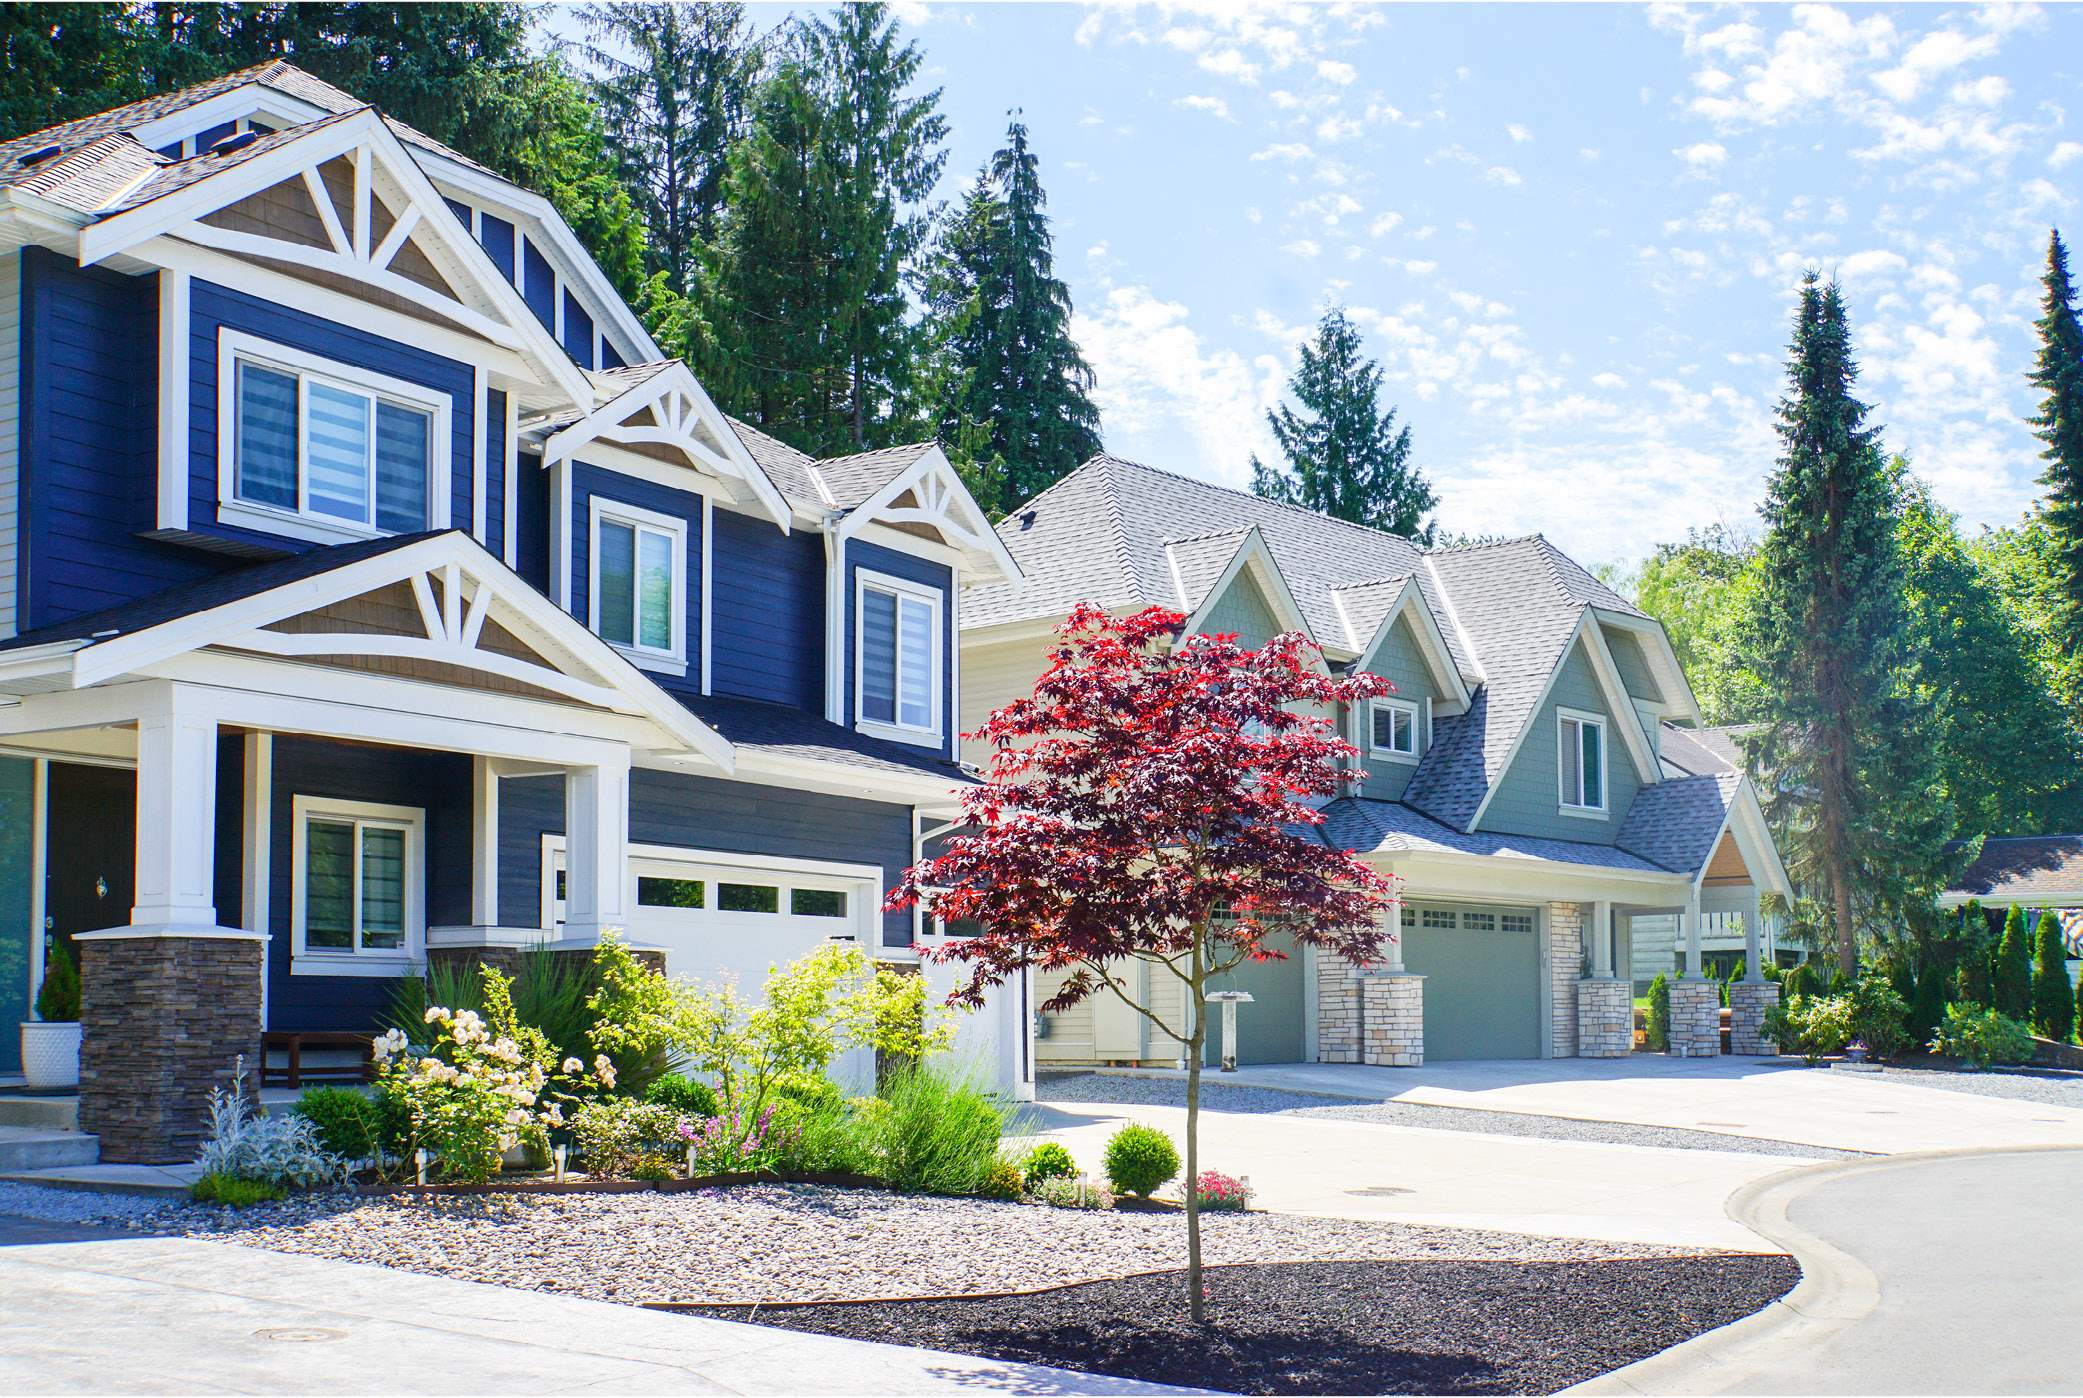 Discover Emerald Ridge, a collection of spacious estate homes in Maple Ridge with 3-car garages and greenbelt views